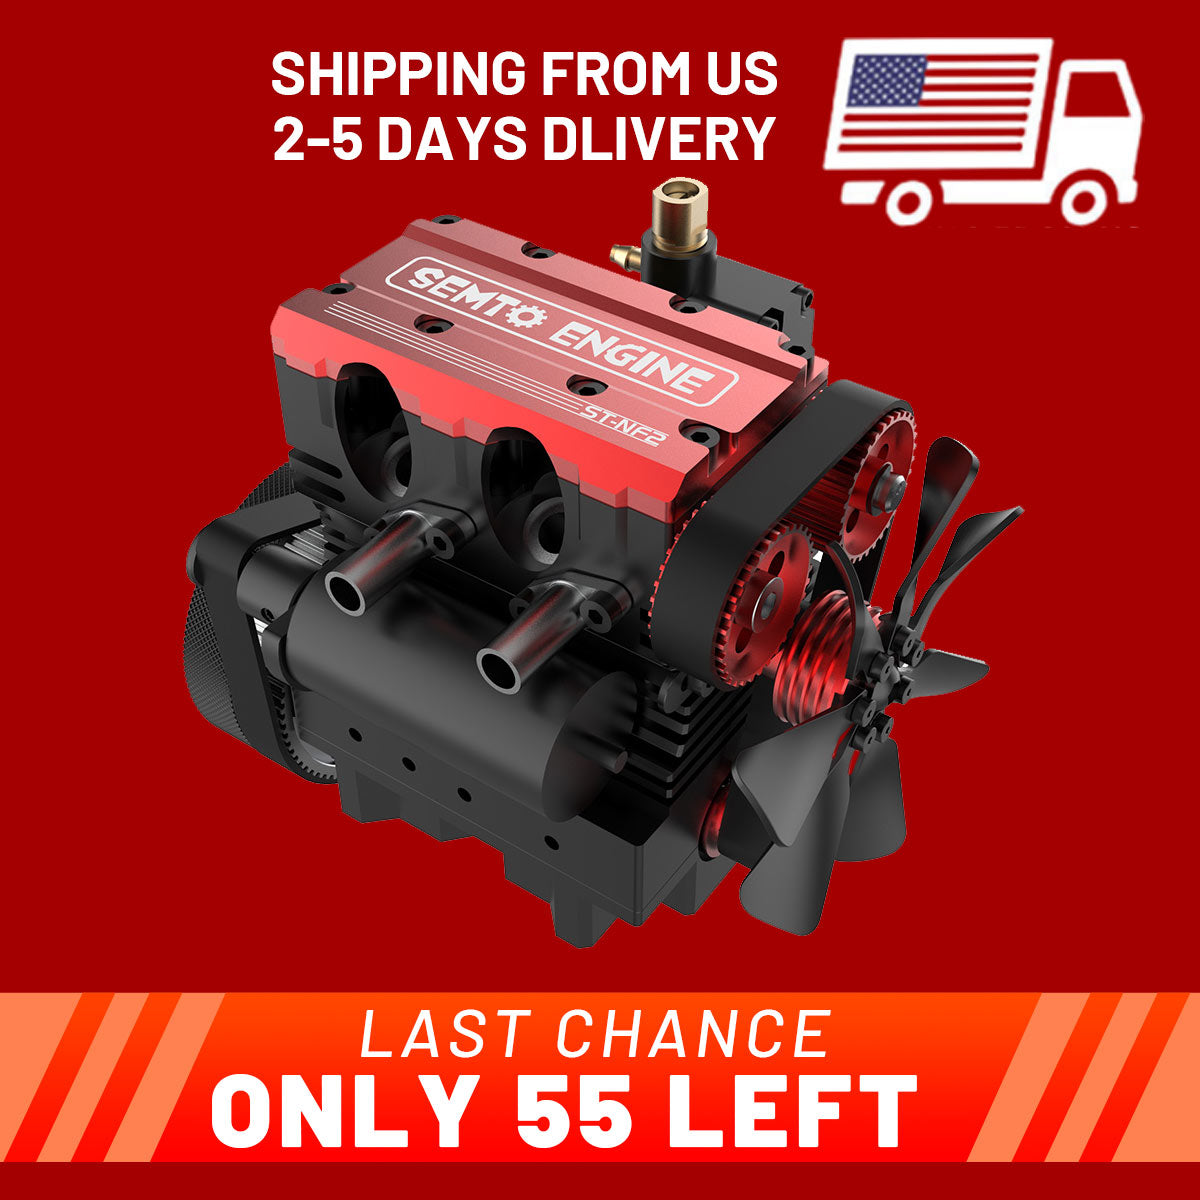 cheap-2-cylinder-engine-kits-shipping from-usa-directly-christmas-stirlingkit-official-website (2).jpg__PID:1cf7112e-16b1-465e-a689-bd401e8c64d4